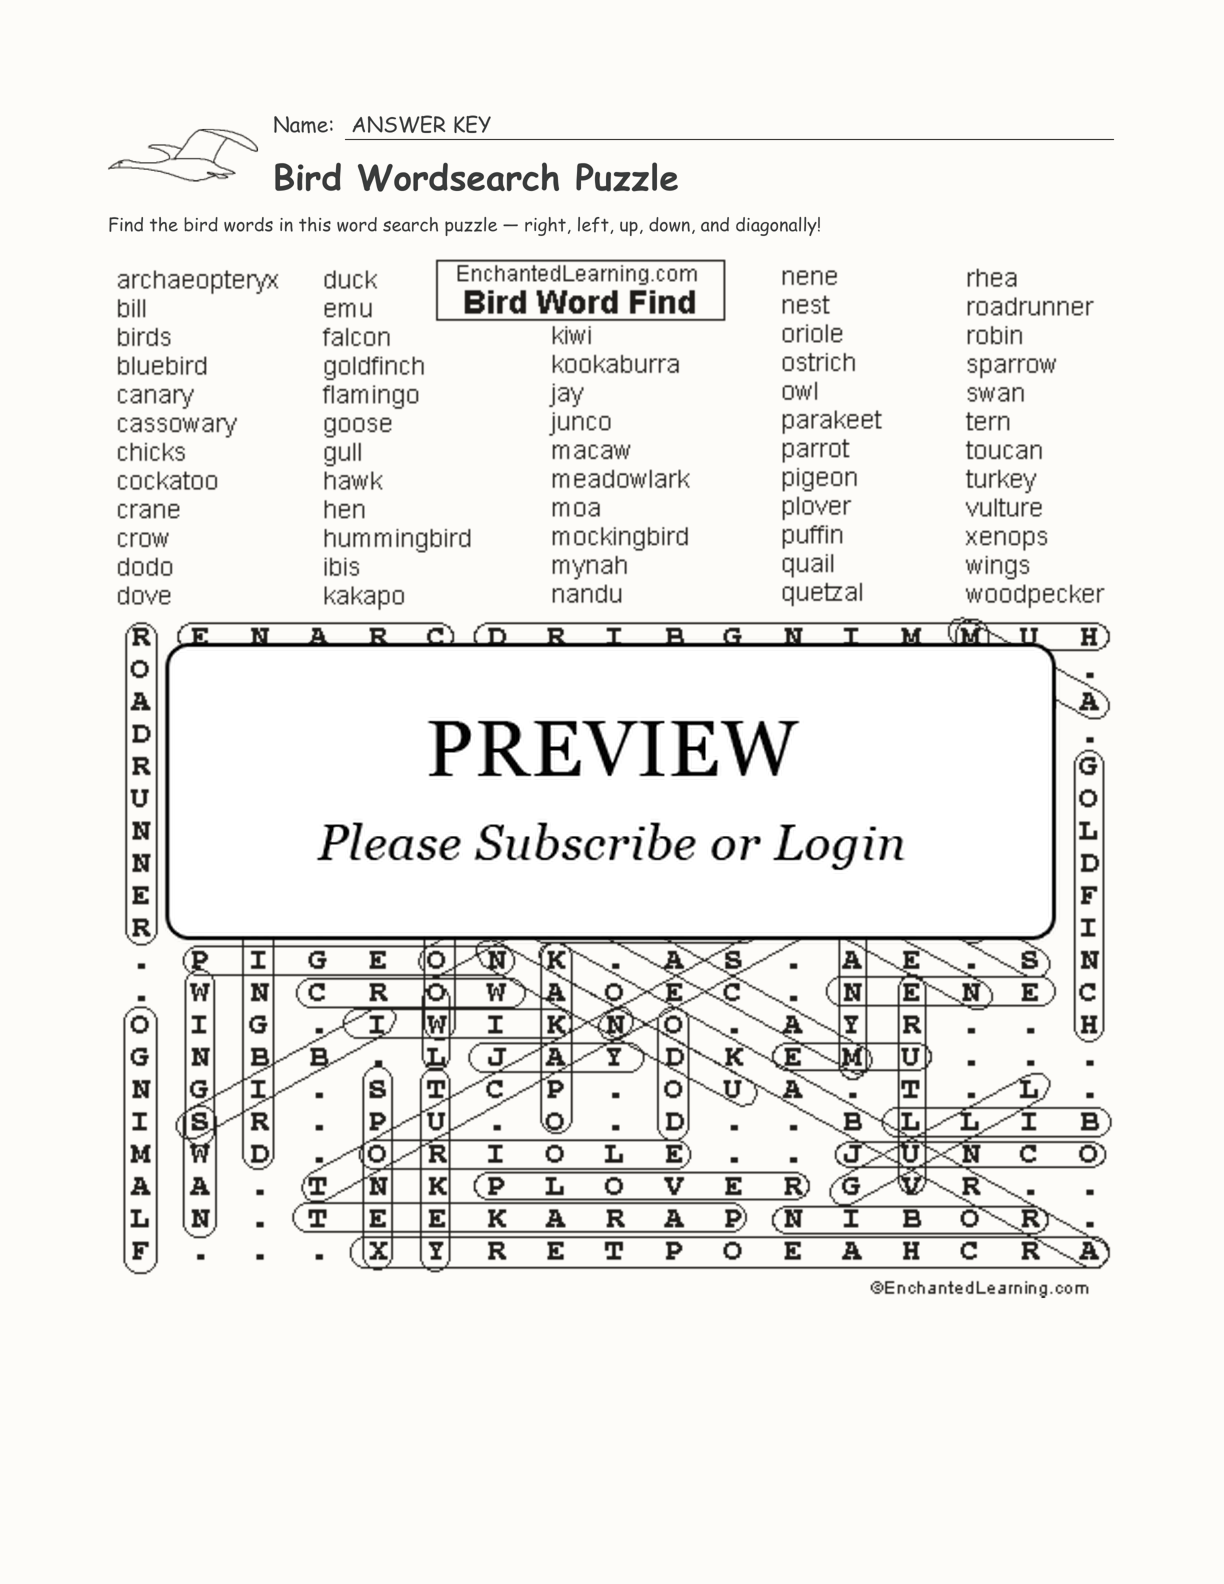 Bird Wordsearch Puzzle interactive worksheet page 2